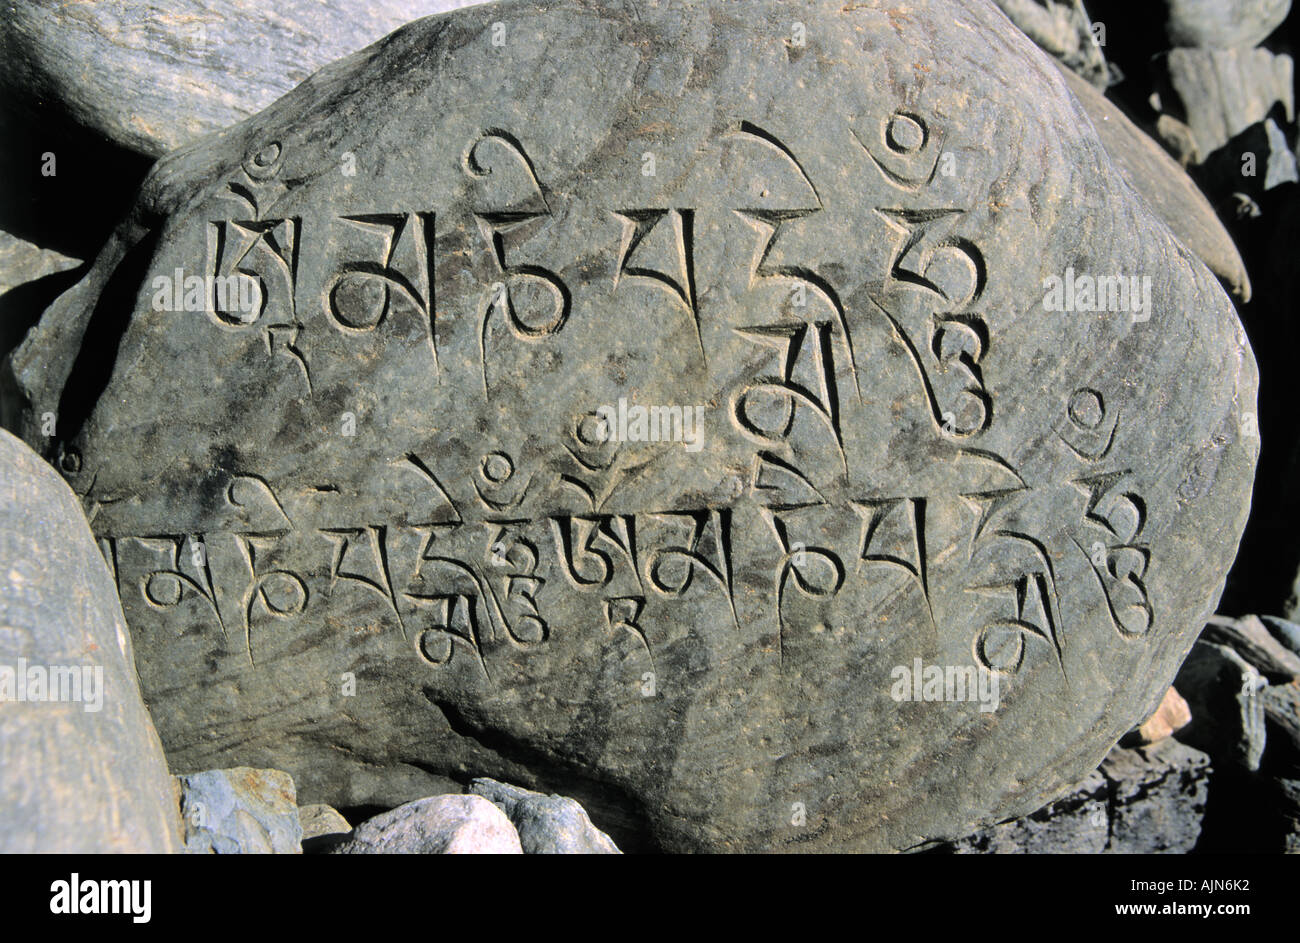 Buddhist mantras and sacred writings on stonee in Chame surroundings Annapurna Conservation area Nepal Stock Photo